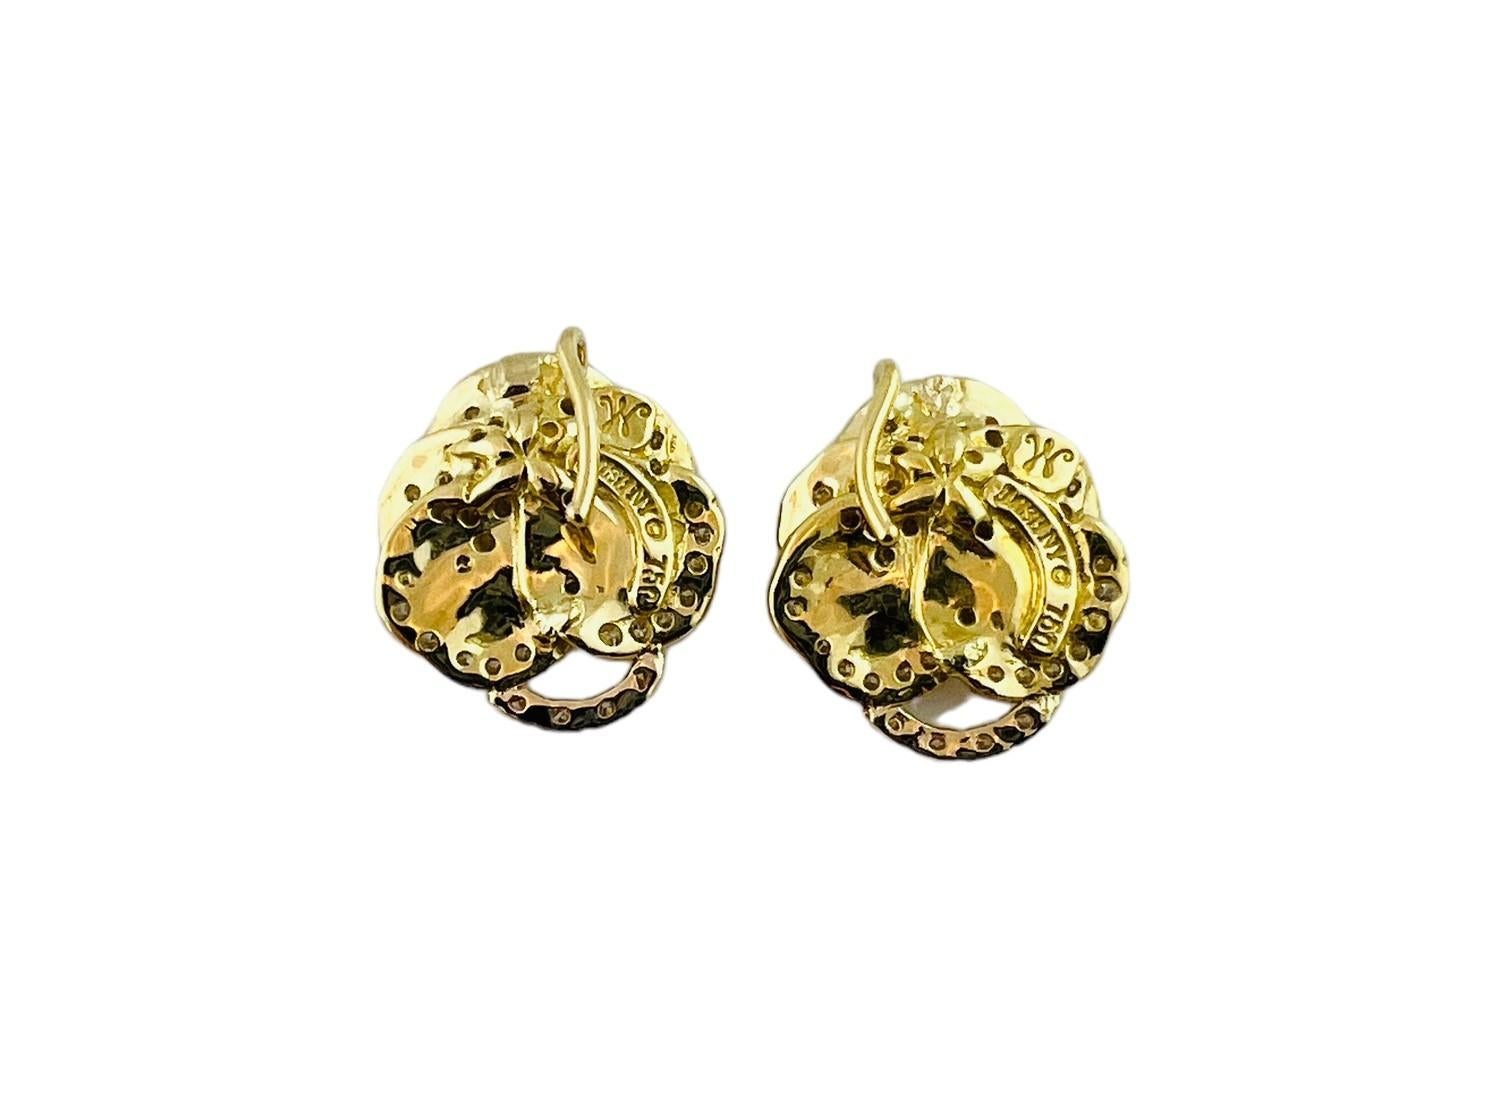 Mish NY 18K Yellow Gold Diamond Pansy Flower Earring Enhancers #15422 For Sale 1